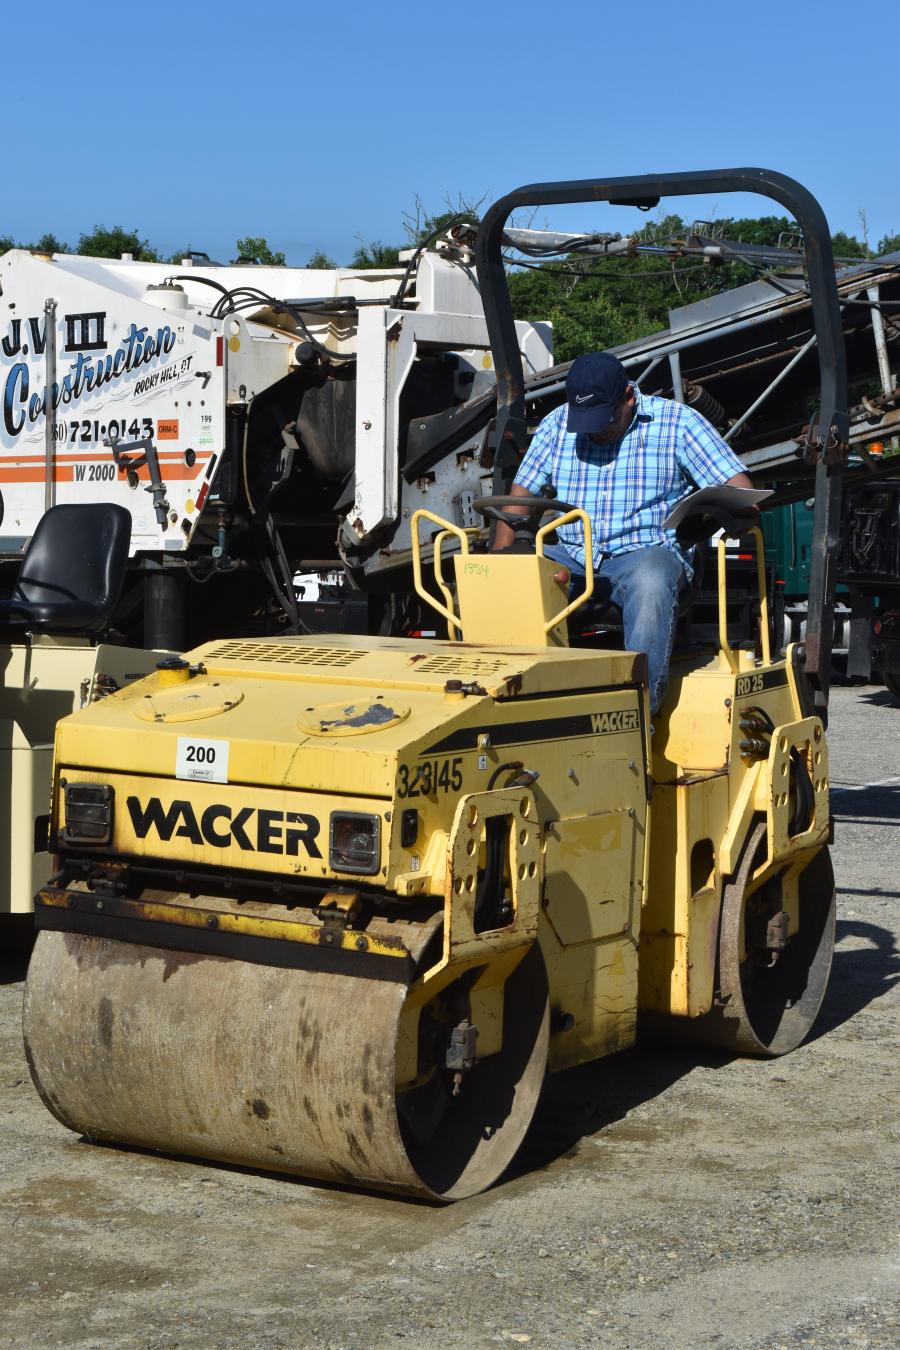 A Wacker Neuson double drum asphalt roller, ideal for a residential paving contractor, gets a test run before it goes on the block.
(CEG photo)